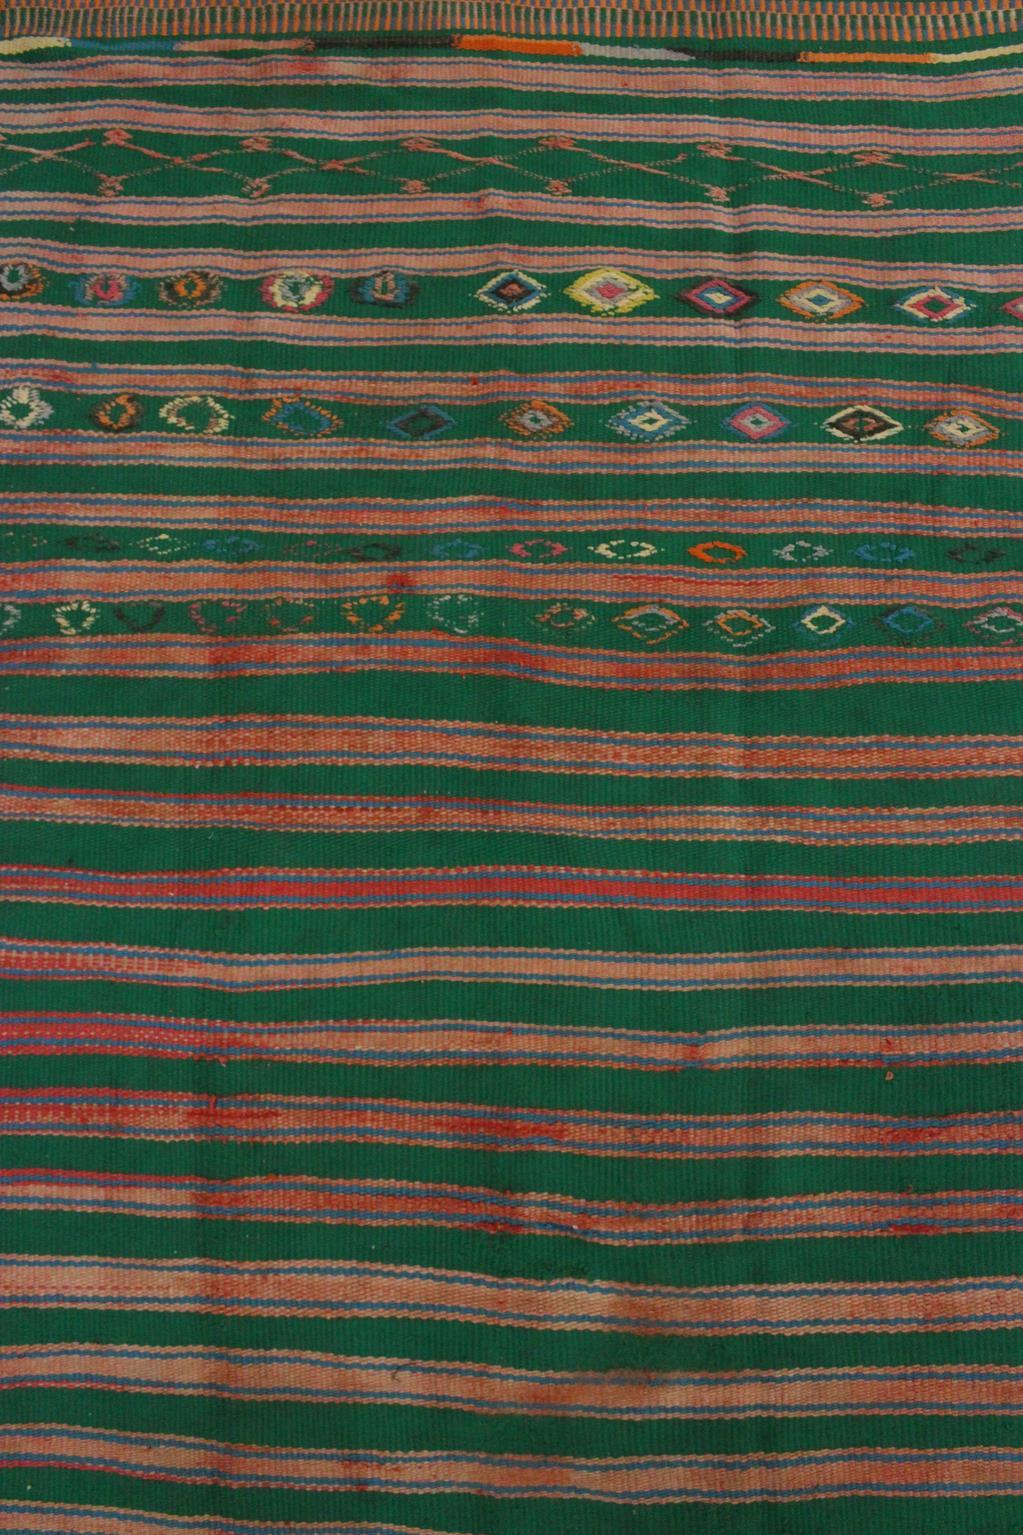 Wool Vintage Moroccan striped kilim rug - Green/pink/red - 5.1x10.2feet / 157x312cm For Sale